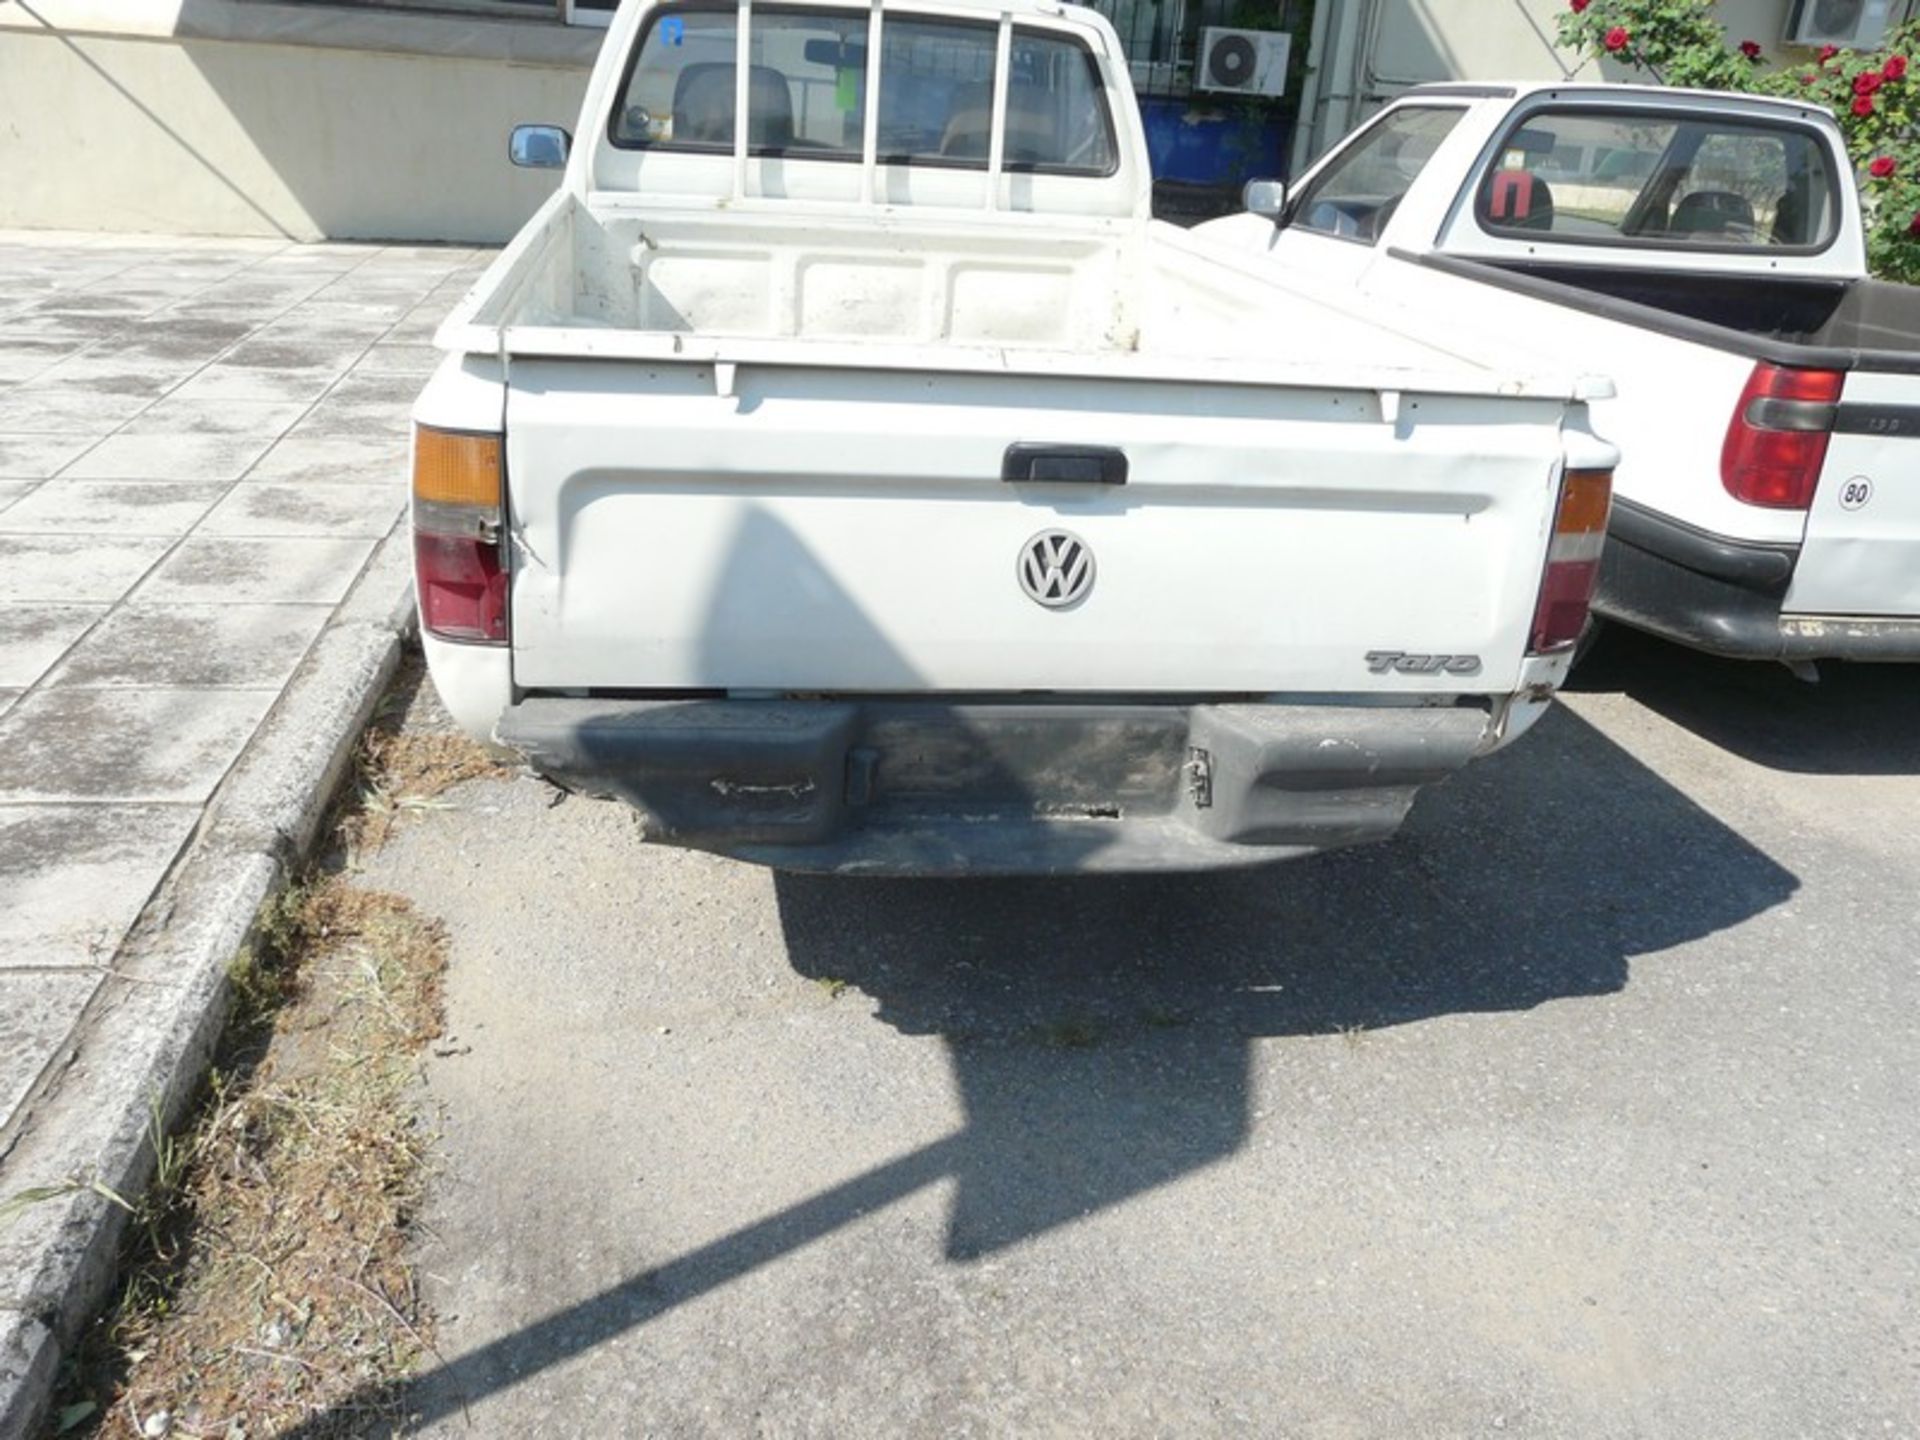 WV TARO REG NBY 4244 ,2.4 DIESEL ,KM 188583,Pick Up Truck ,2 Doors, Service Book Available , Year: - Image 7 of 15